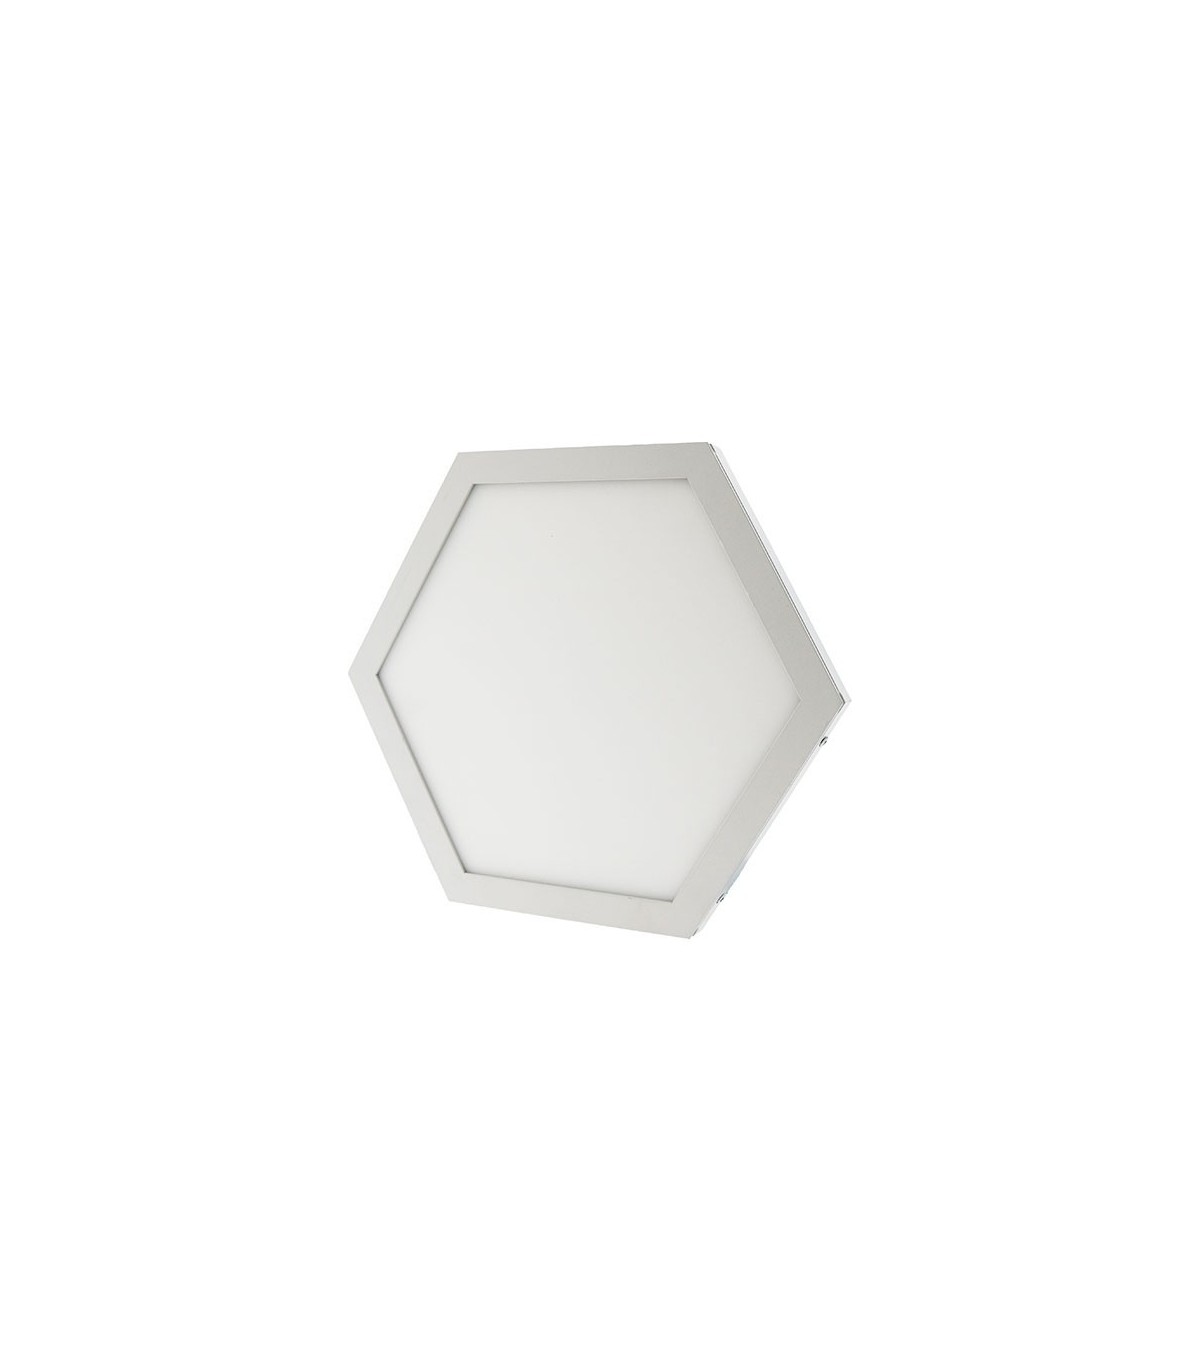 Mustache Appoint Almost Plafón Led Superficie 10W 840LM 120º IP40 Hexagonal Blanco